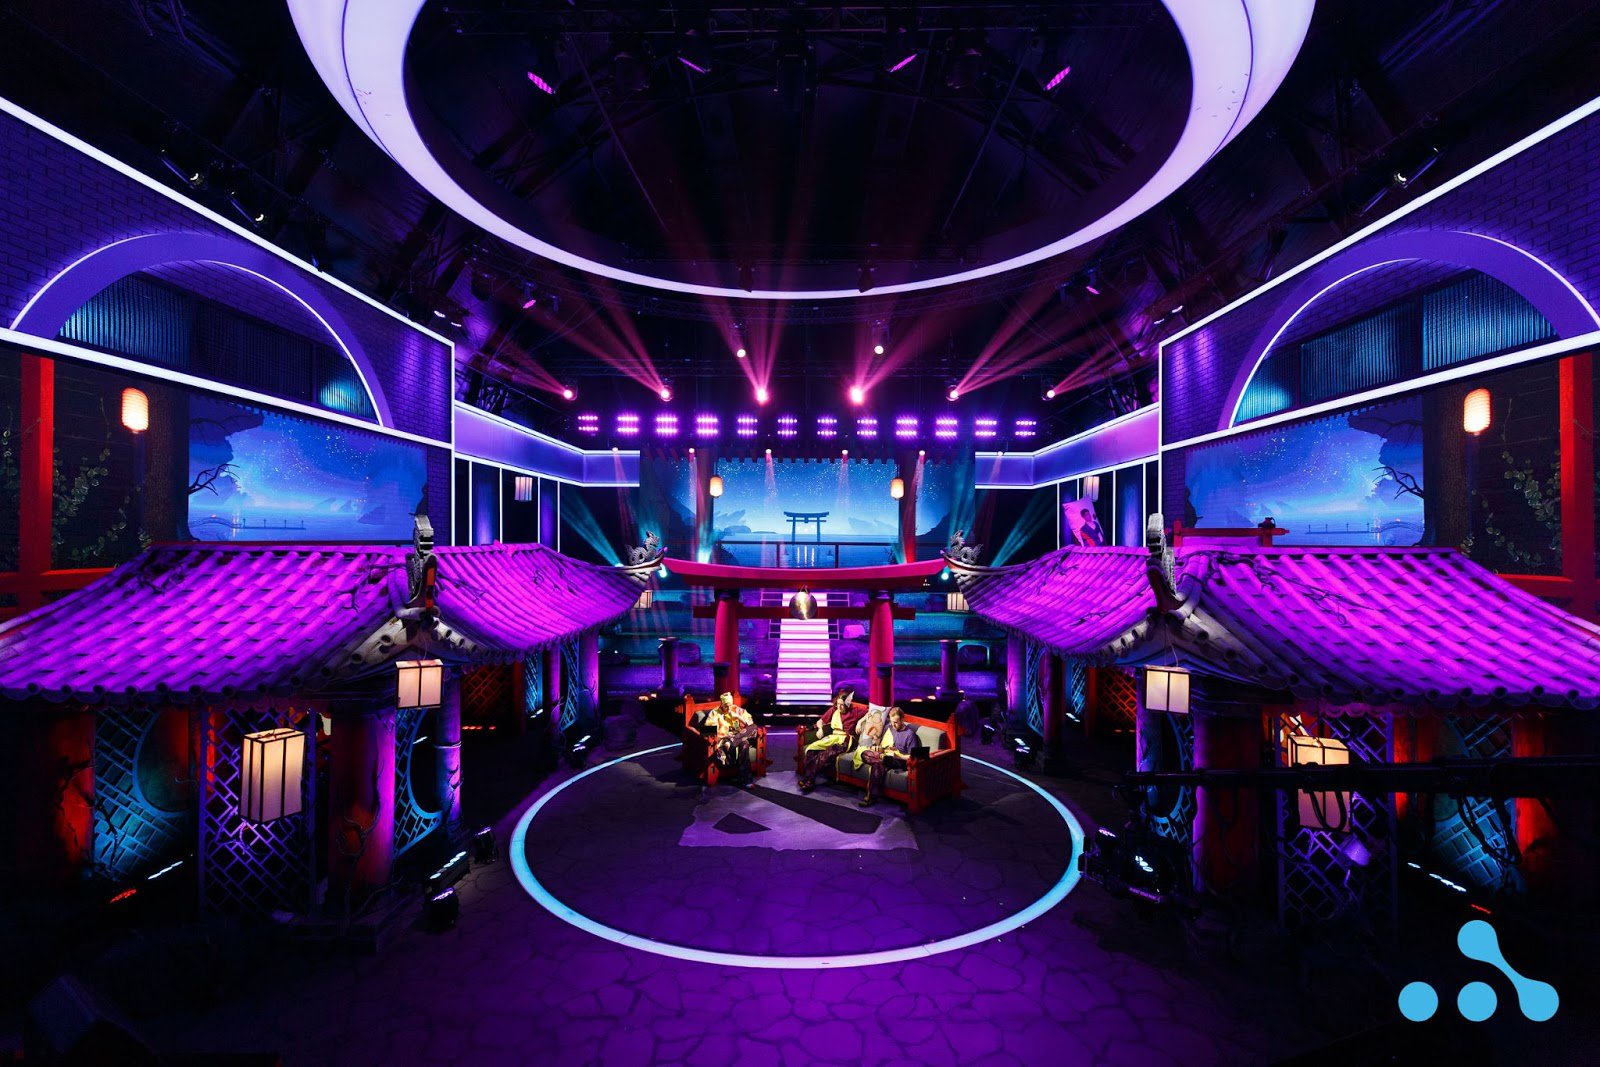 Immersive atmosphere and tailor-made effects set the tone at WePlay AniMajor